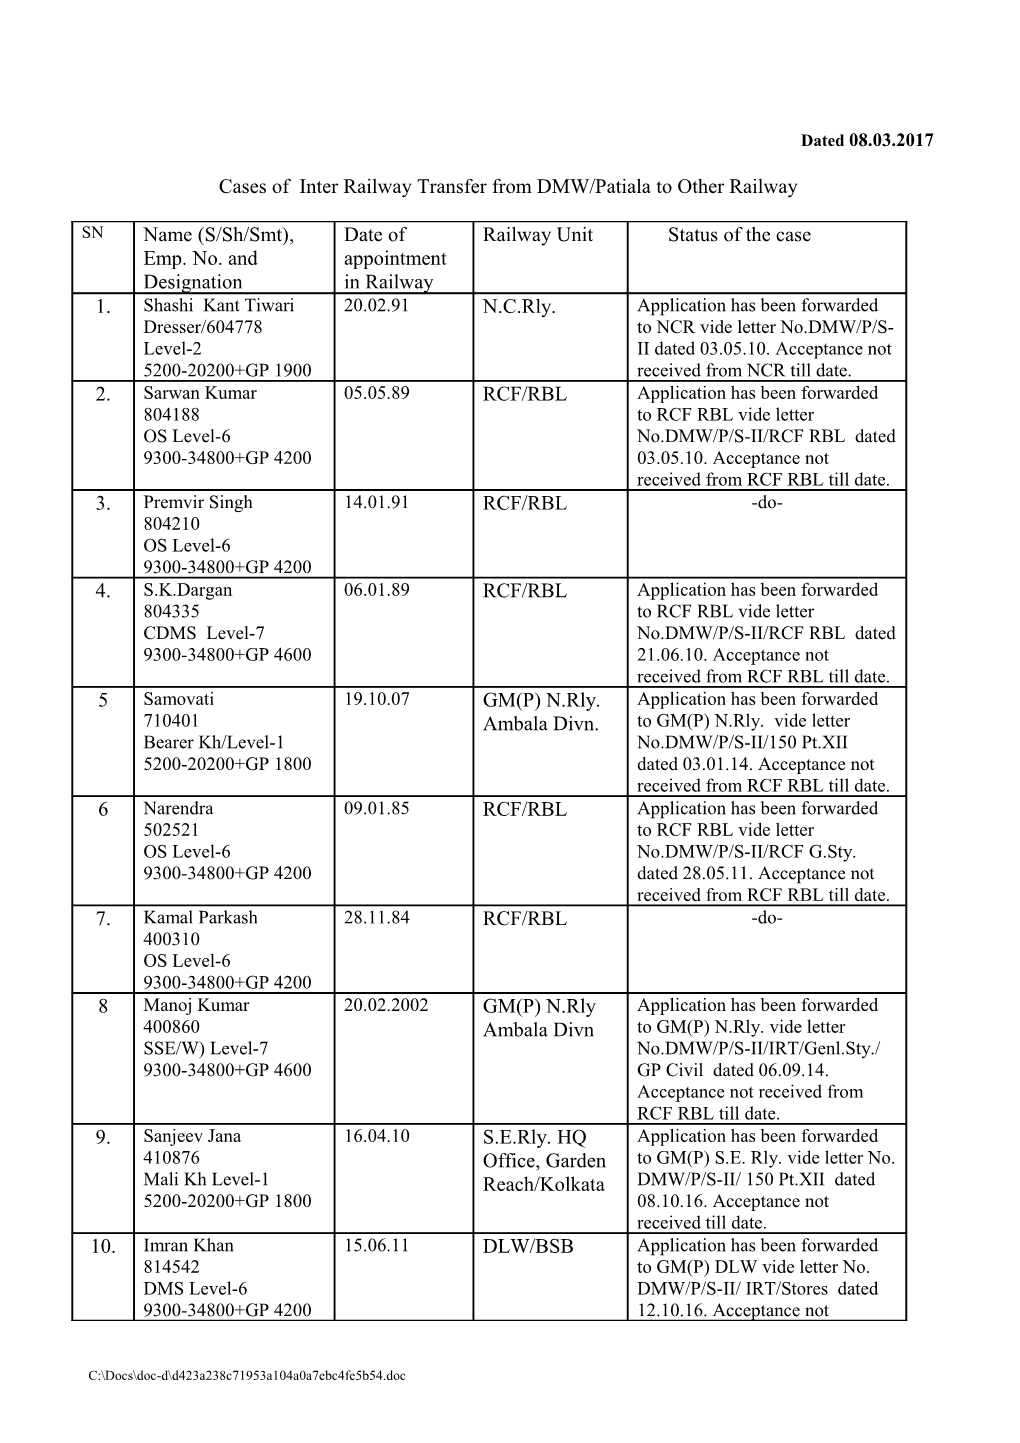 Cases of Inter Railway Transfer from DMW/Patiala to Other Railway